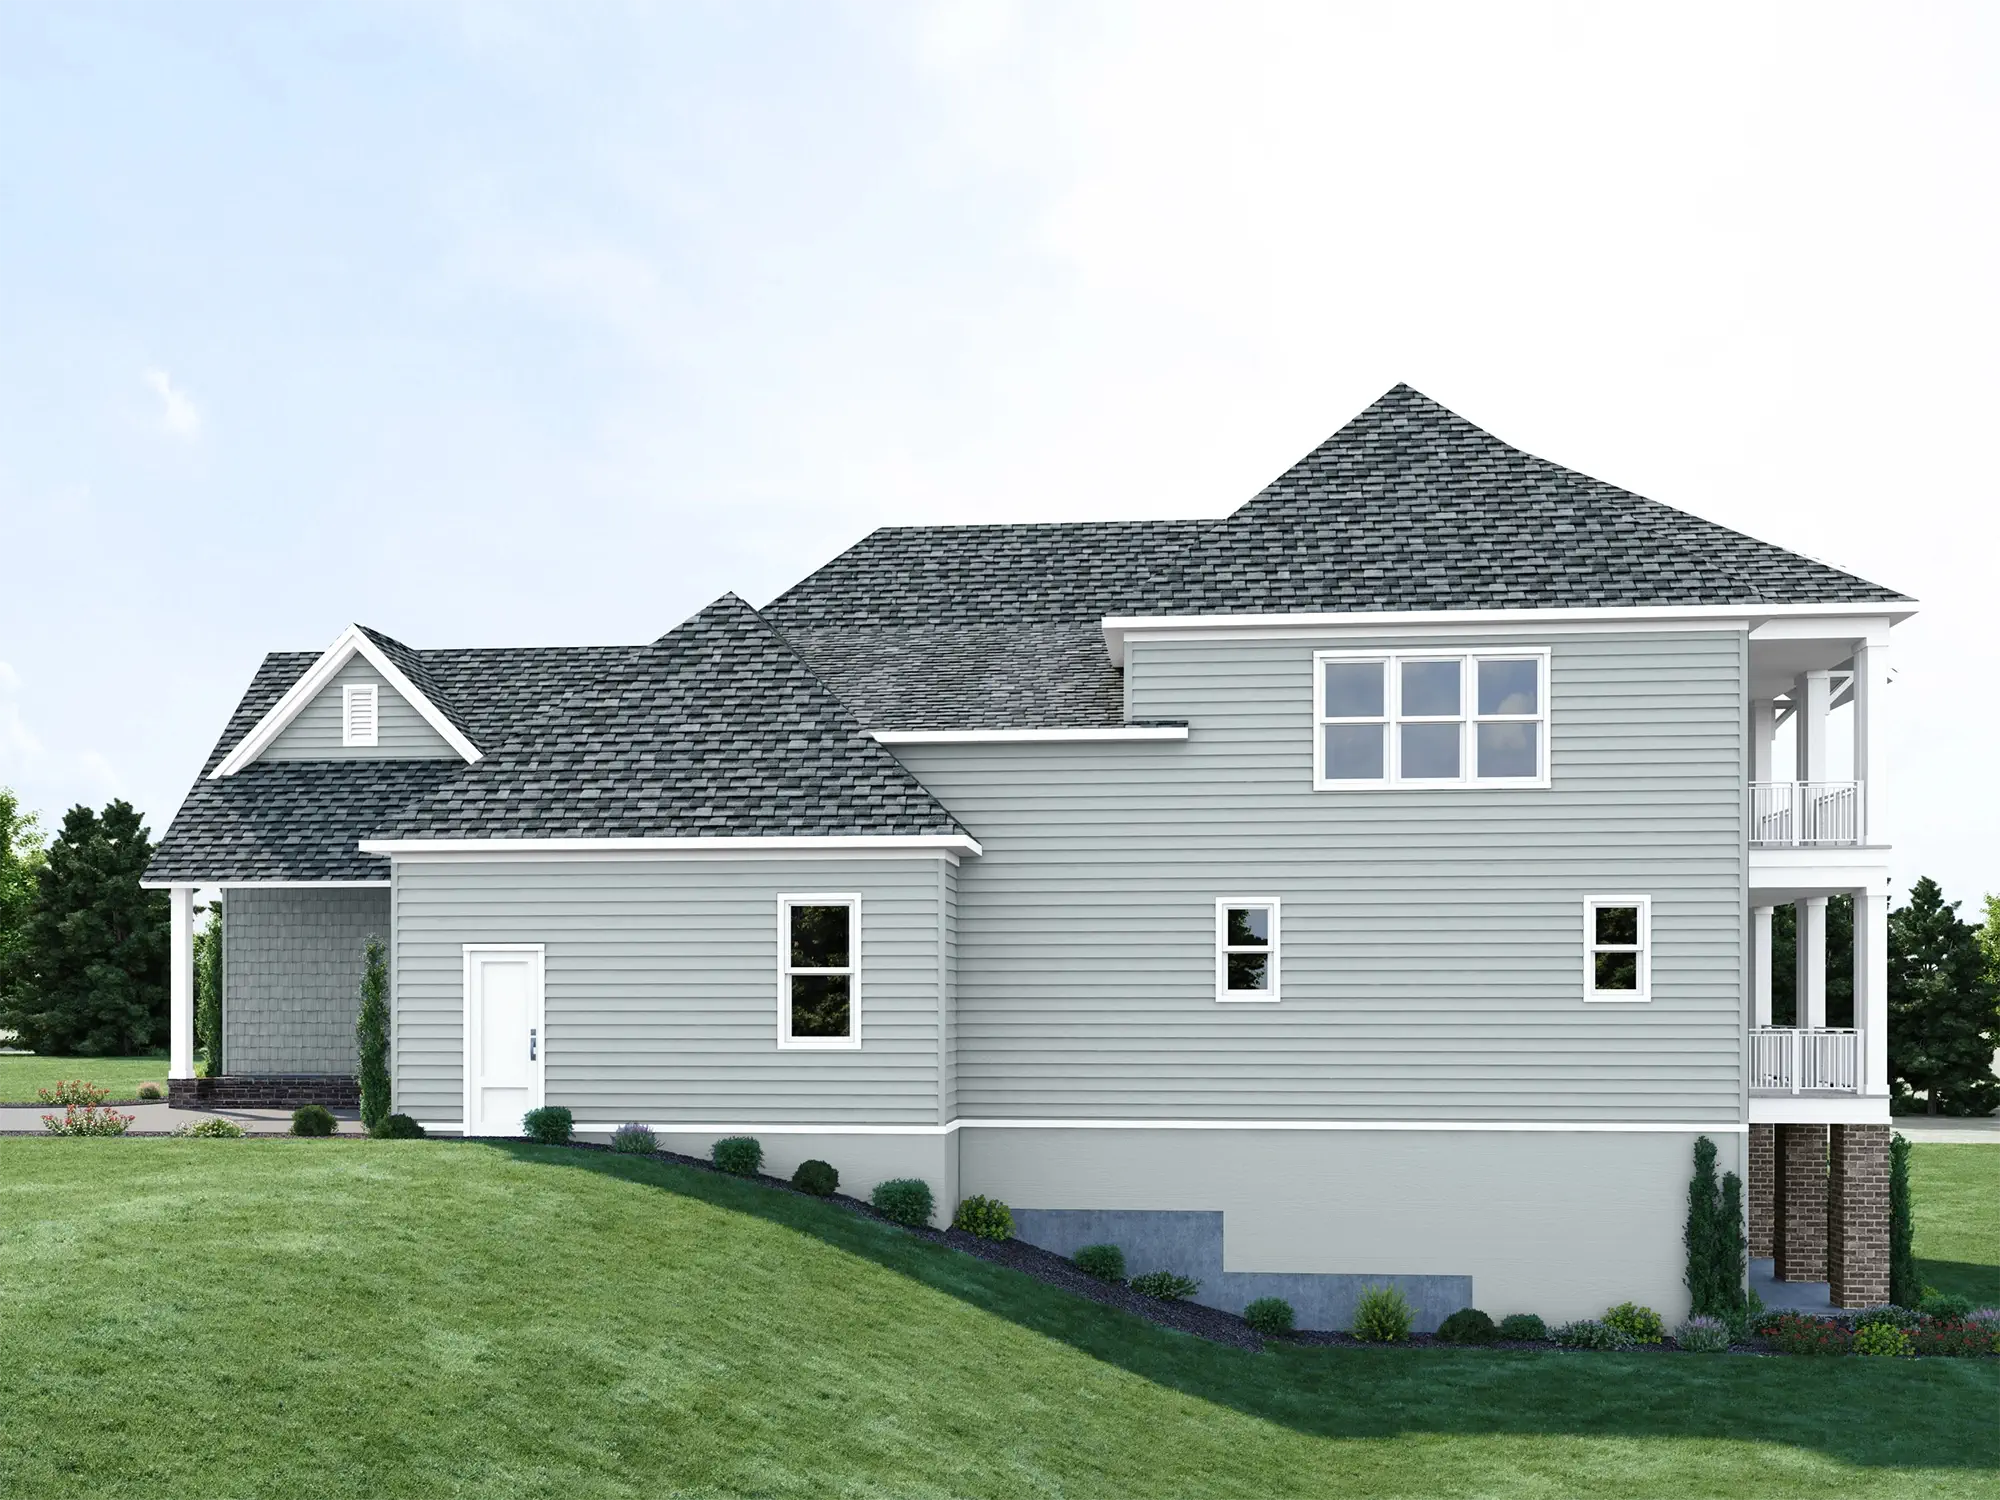 Harborview - House Rendering Side View